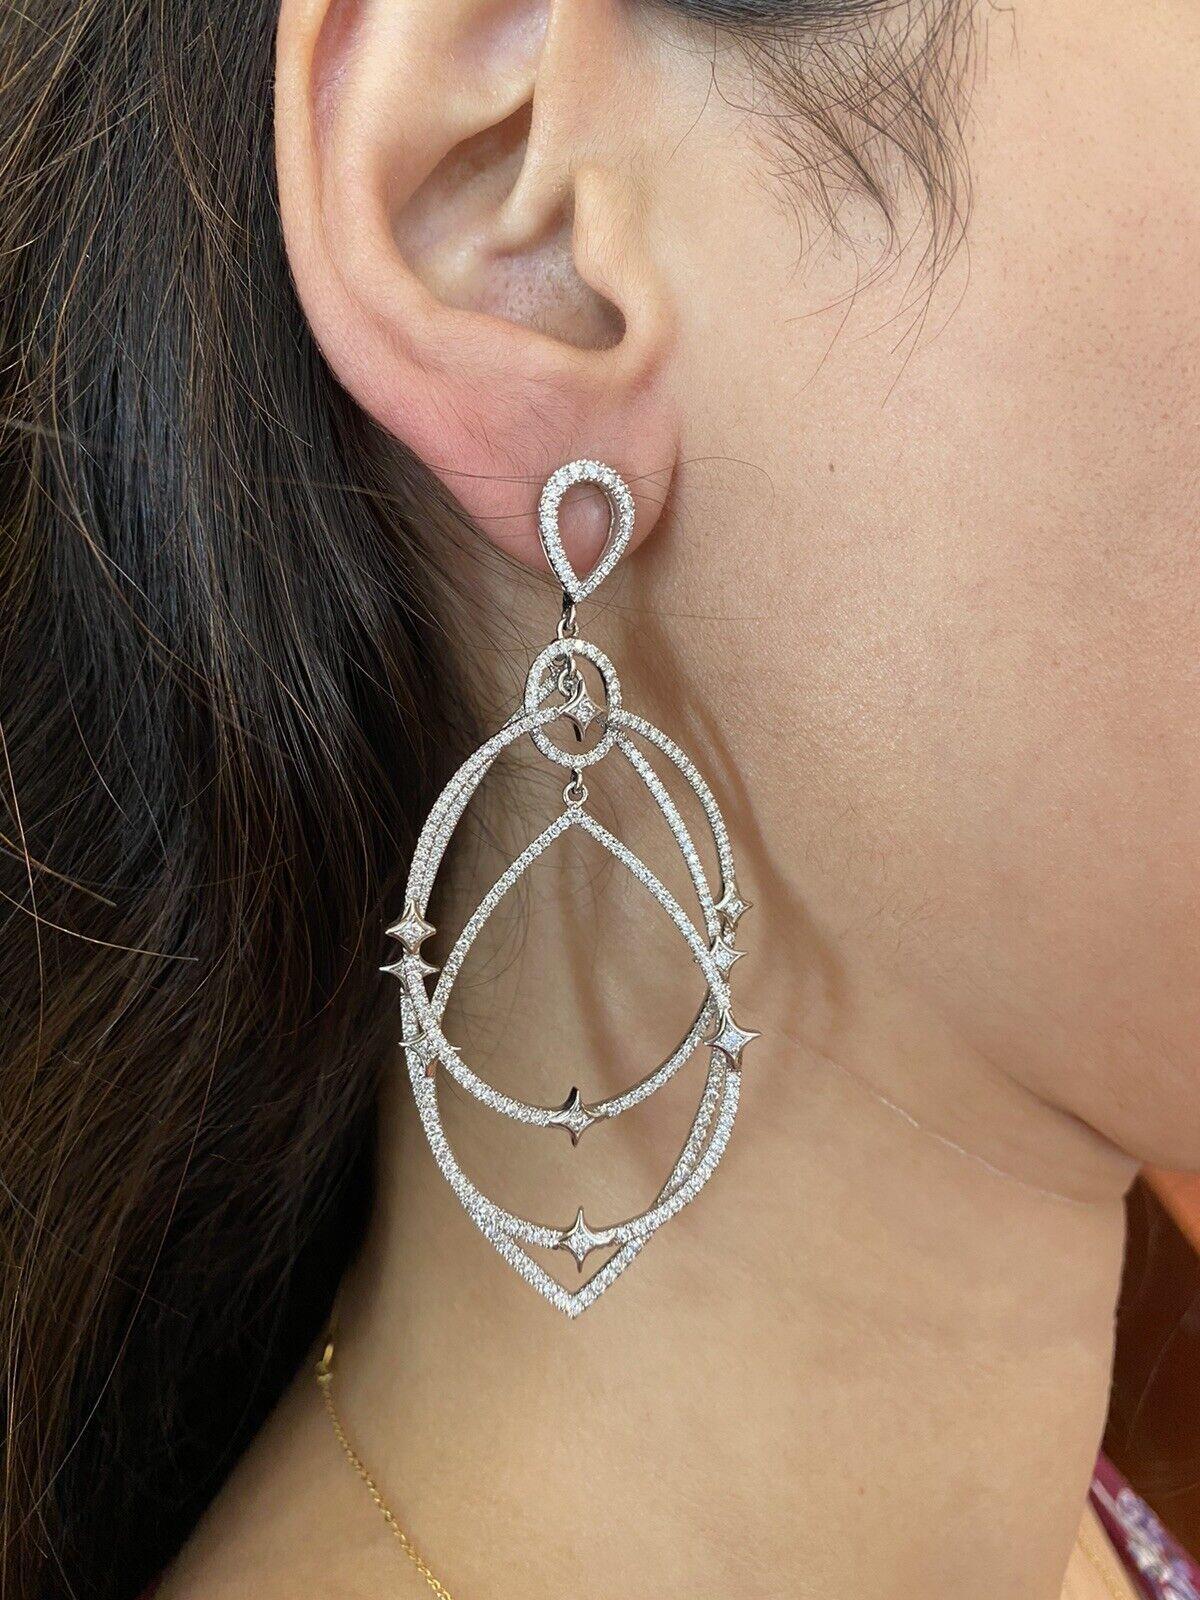 Large 5.40 carat total Diamond Chandelier Dangle Earrings in 18k White Gold In Excellent Condition For Sale In La Jolla, CA